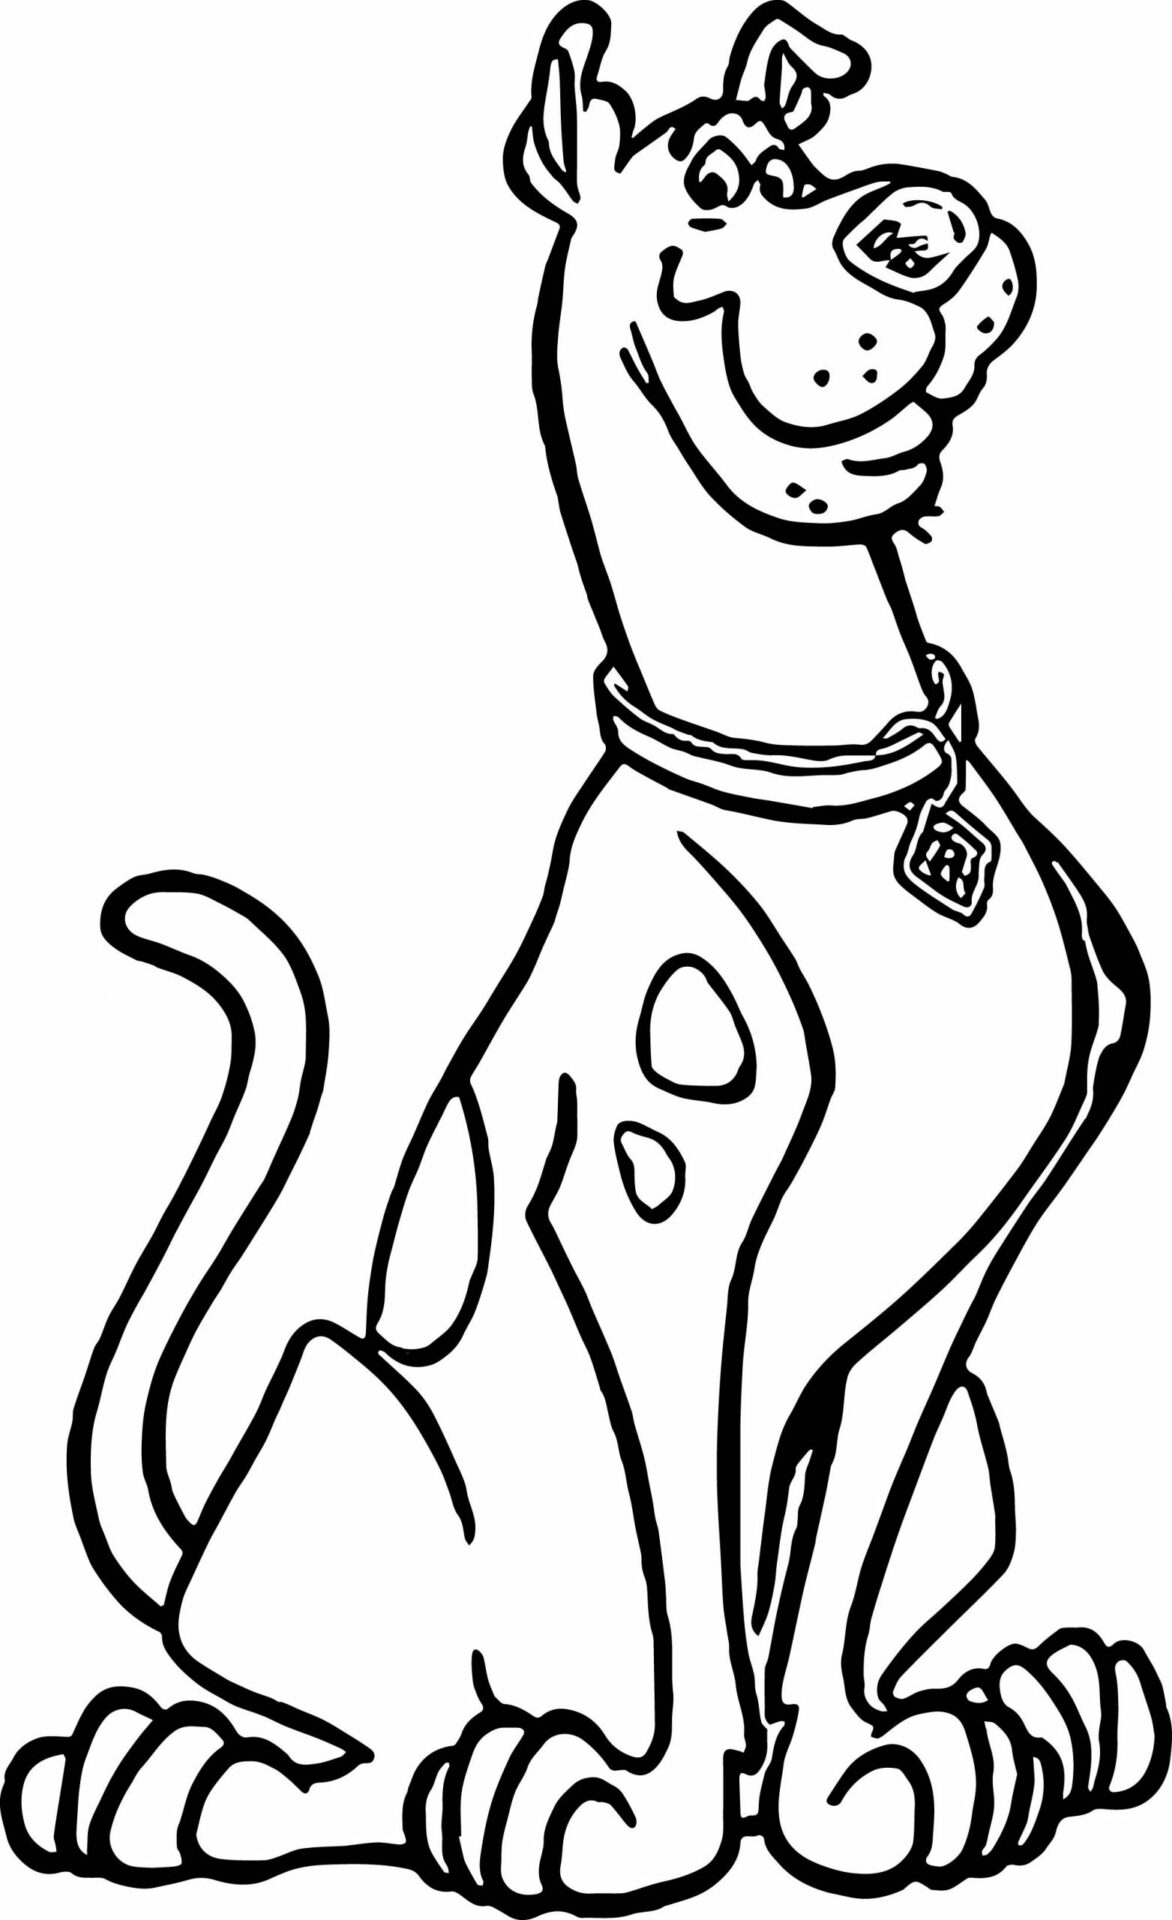 scooby-doo-reading-map-coloring-page-free-printable-coloring-pages